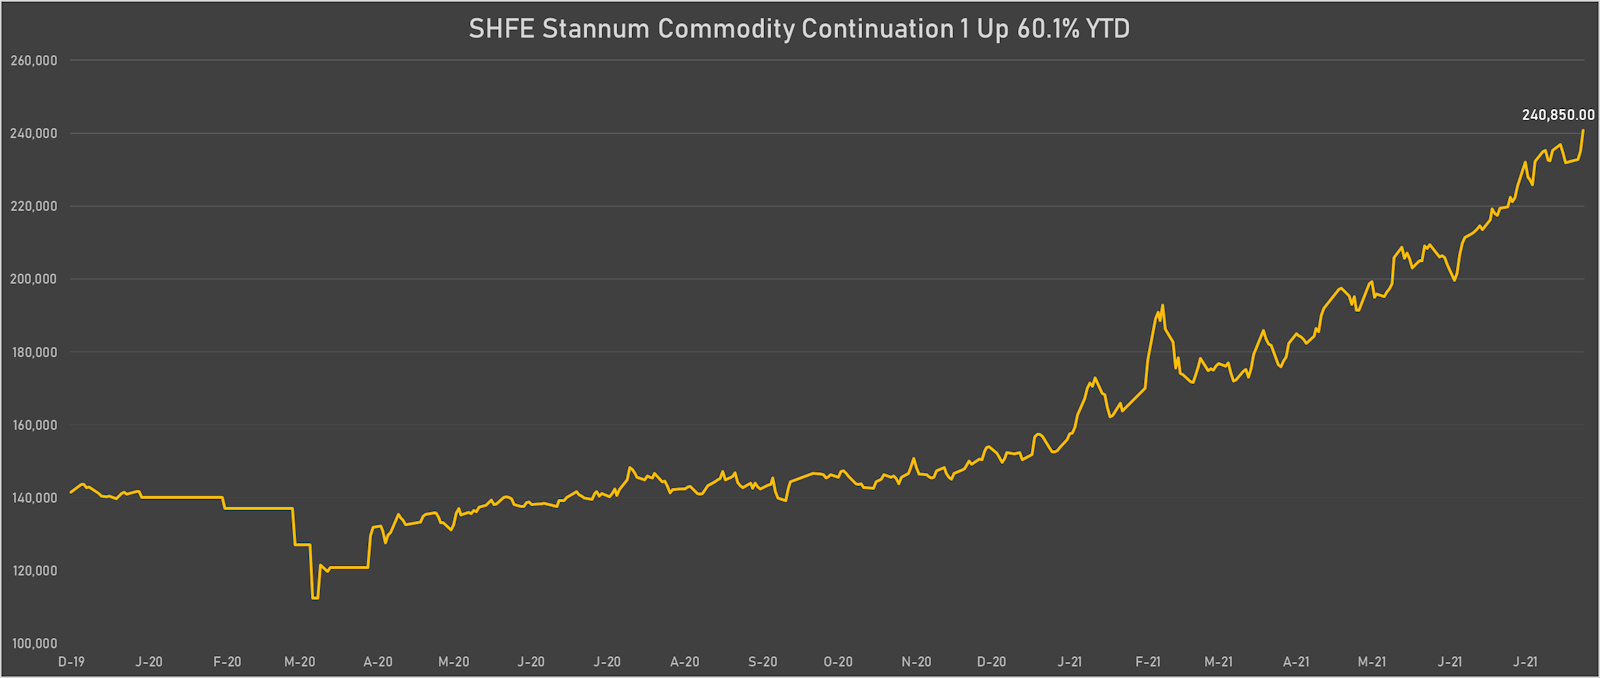 Tin keeps rising on the Shanghai futures exchange, now up 60% year to date | Sources: ϕpost, Refinitiv data